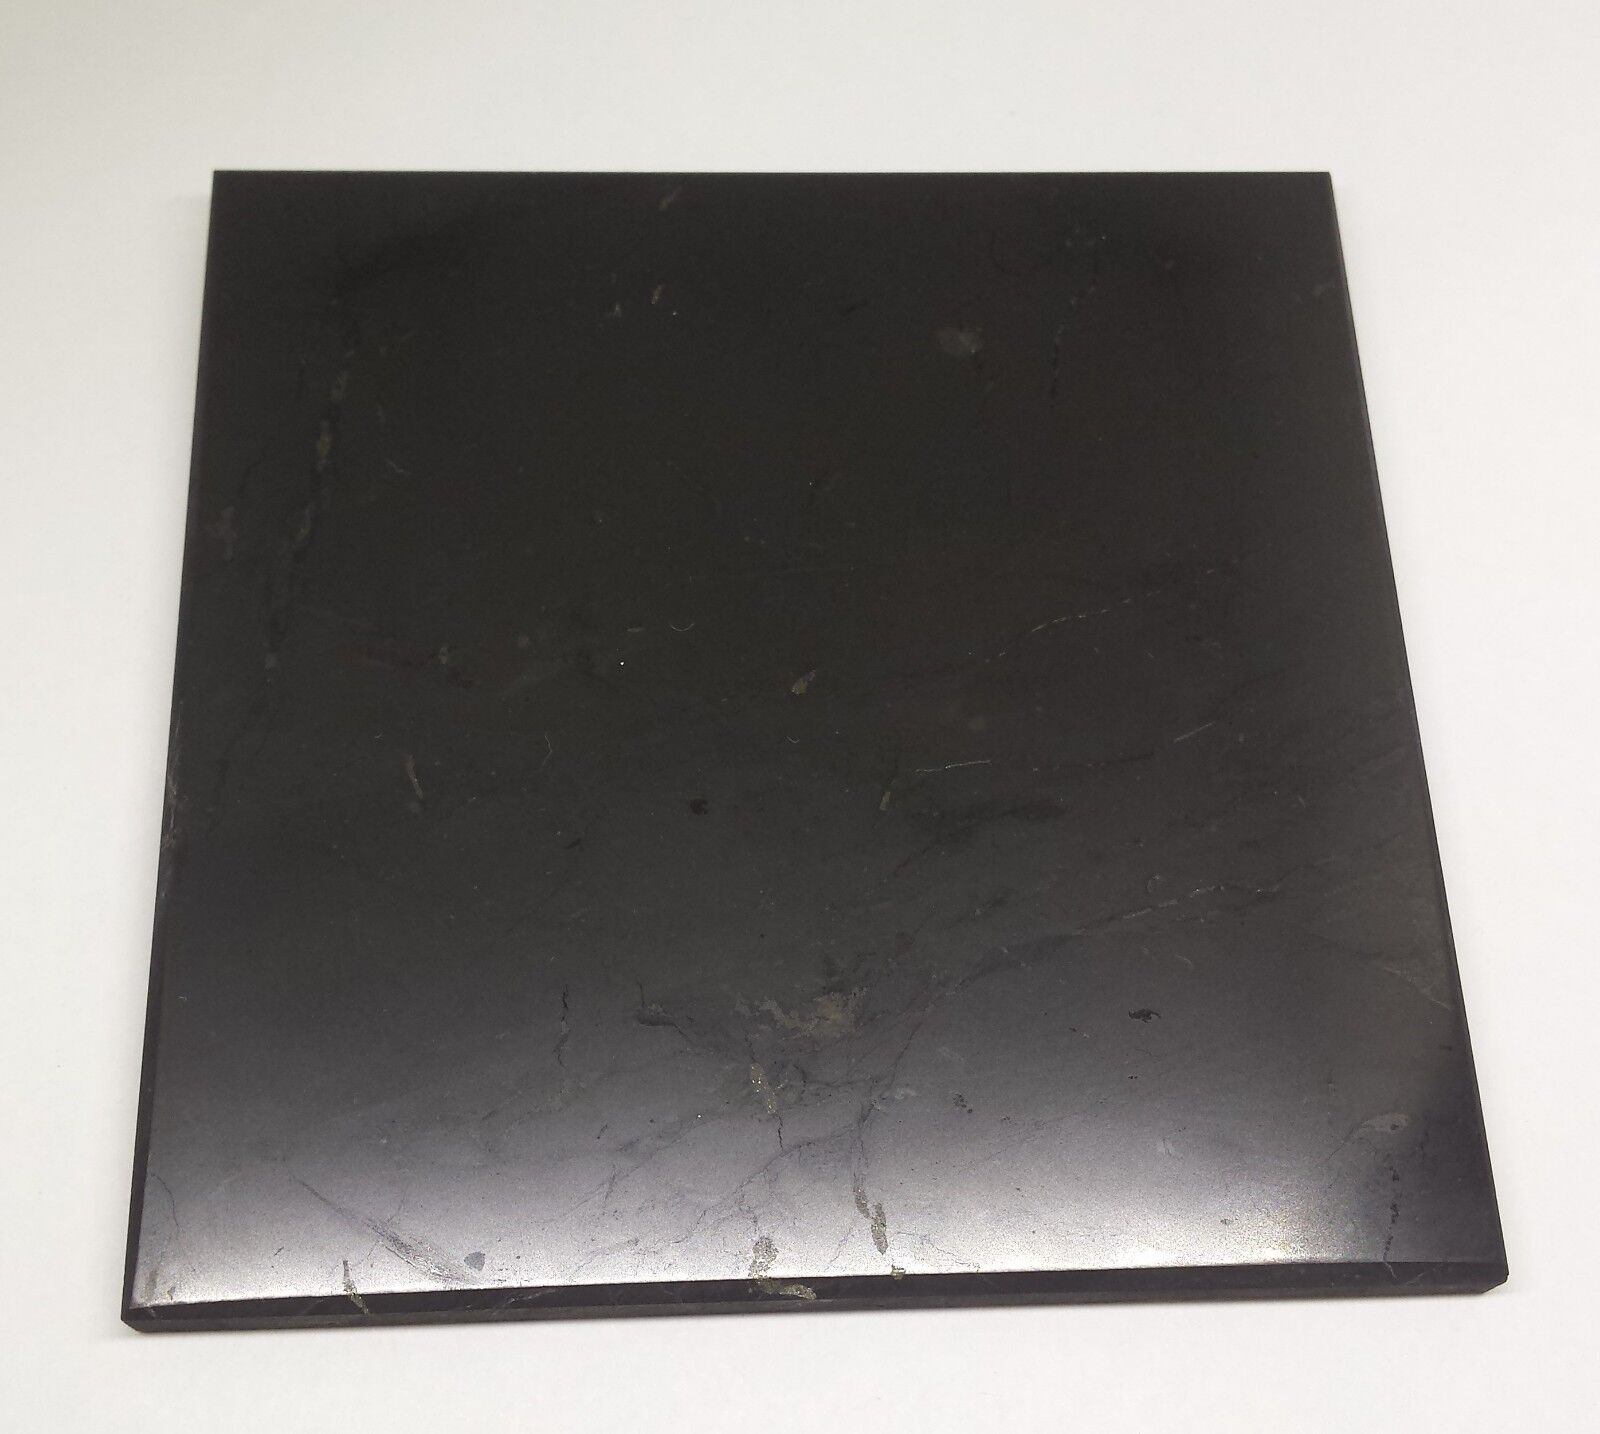 Shungite Stone Tile Plate 100 x 100 mm approx 4 x 4 inch POLISHED thick 10-11 mm